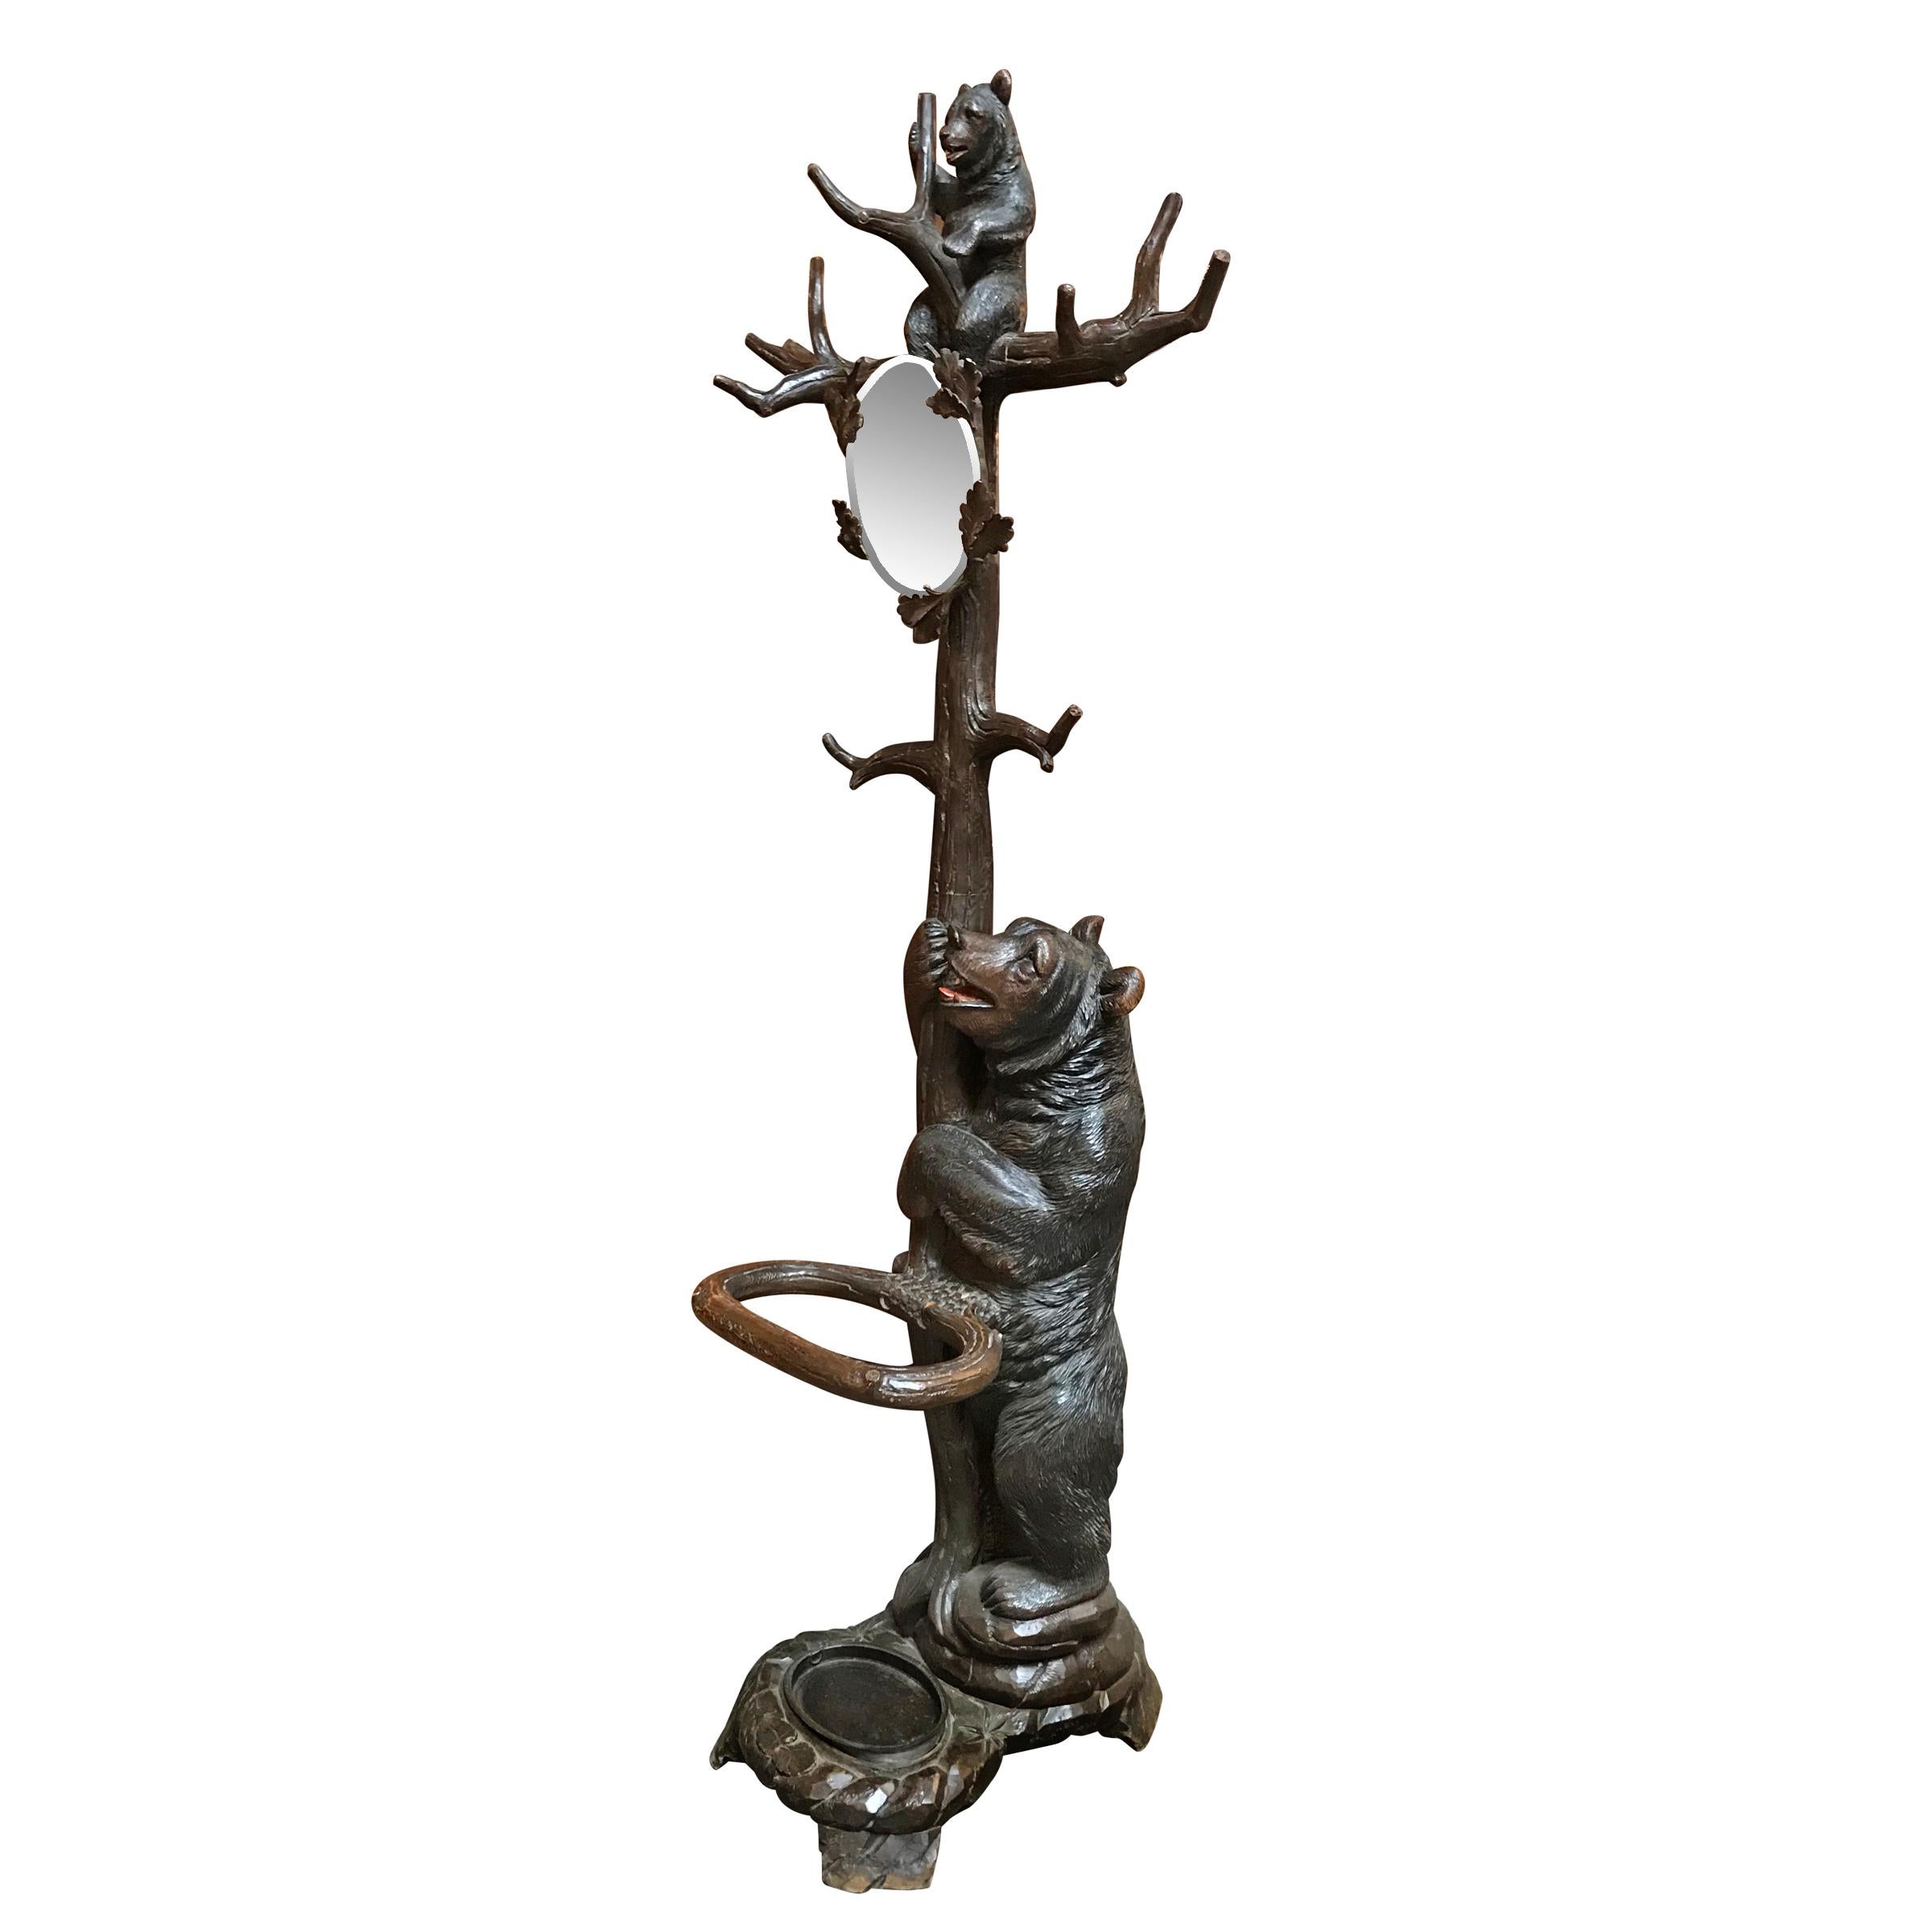 A whimsical early 20th century Swiss Black Forest carved wood hall tree attributed to Seilar-Brawant of Brienz, Switzerland. The bears are wonderfully expressive, with glass eyes, and painted mouths, with the cub climbing up a tree with ten branches